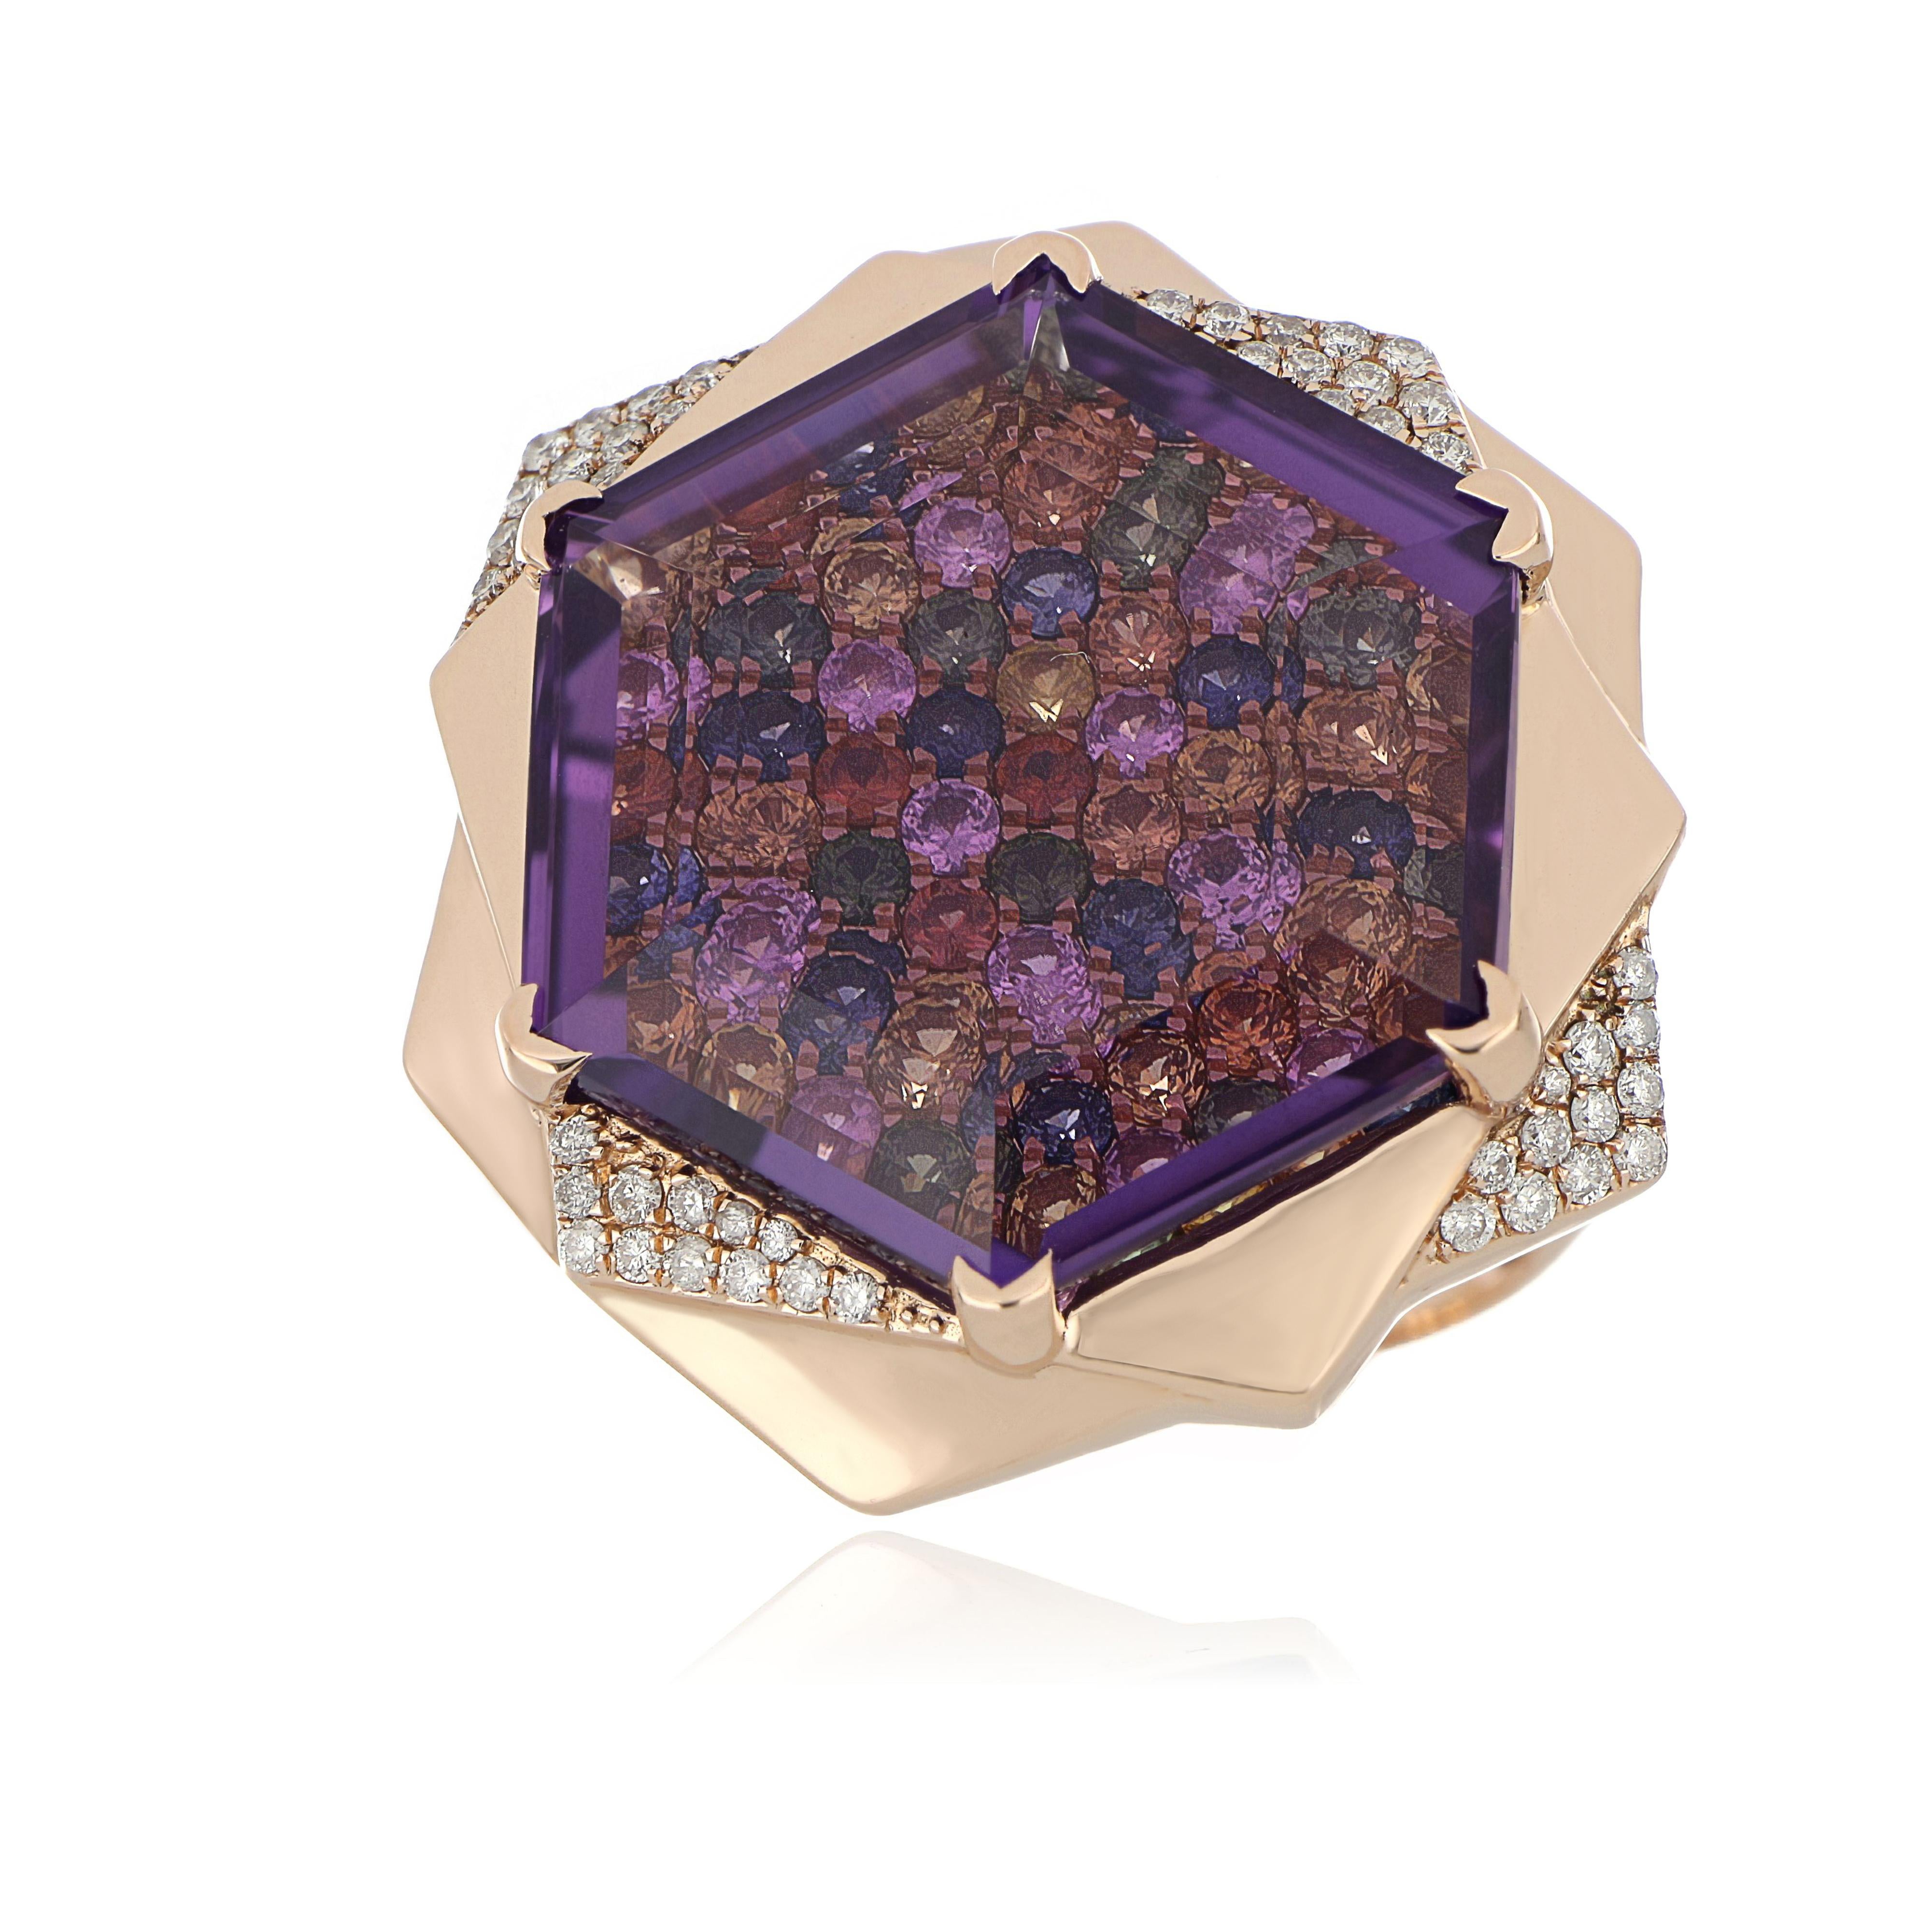 14 Karat Rose Gold ring studded with Hexagon Cut  22.14 Ct  Amethyst,  with unique under stone setting of 3.35 Ct Multi Sapphire accented with 0.27 Cts Diamond Beautifully hand crafted in 14 Karat Rose Gold.

Stone Details:
Amethyst: 22.4 x 19.8